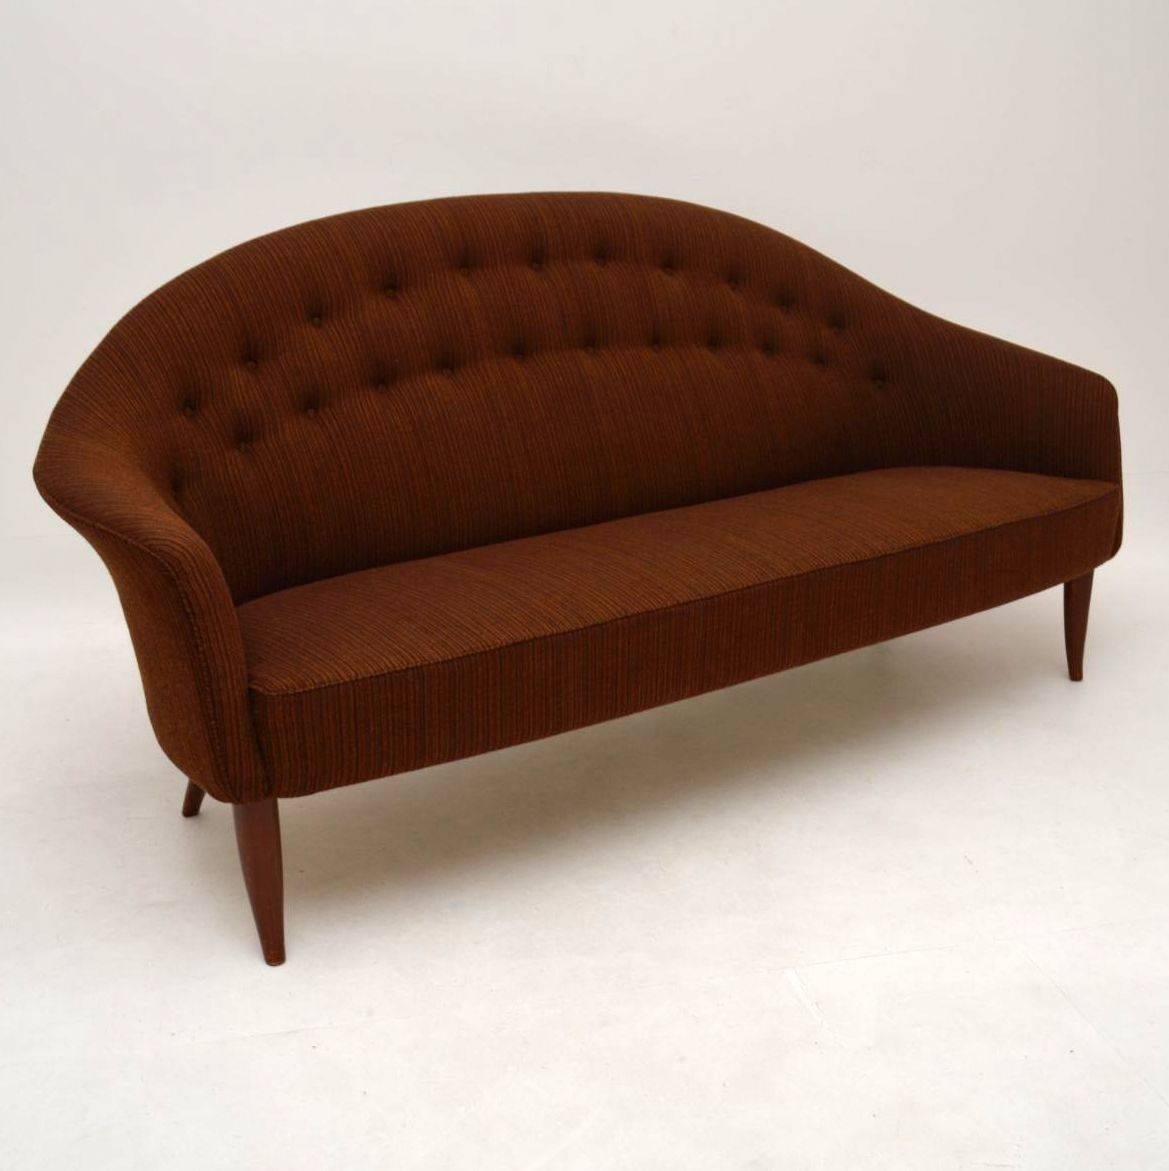 A stunning and rare vintage sofa made in Sweden, this dates from the 1960s, it was designed by Kirstin Horlin Holmquist. It’s called the ‘Paradiset’ sofa, it’s of amazing quality and is in superb condition for its age. The upholstery is clean and